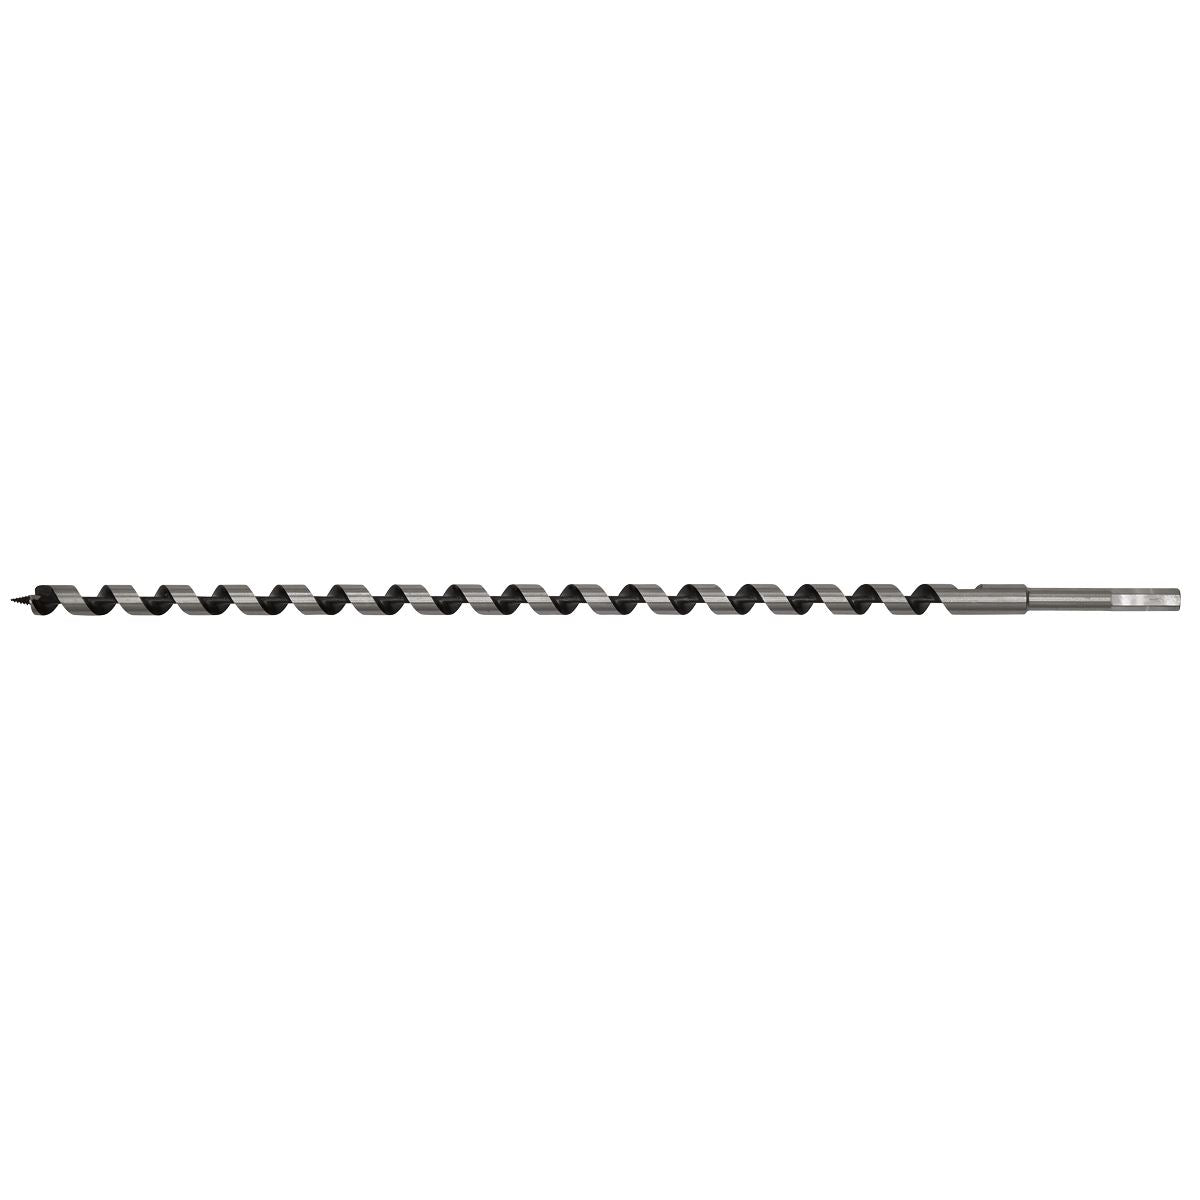 Worksafe by Sealey Auger Wood Drill Bit 16mm x 600mm